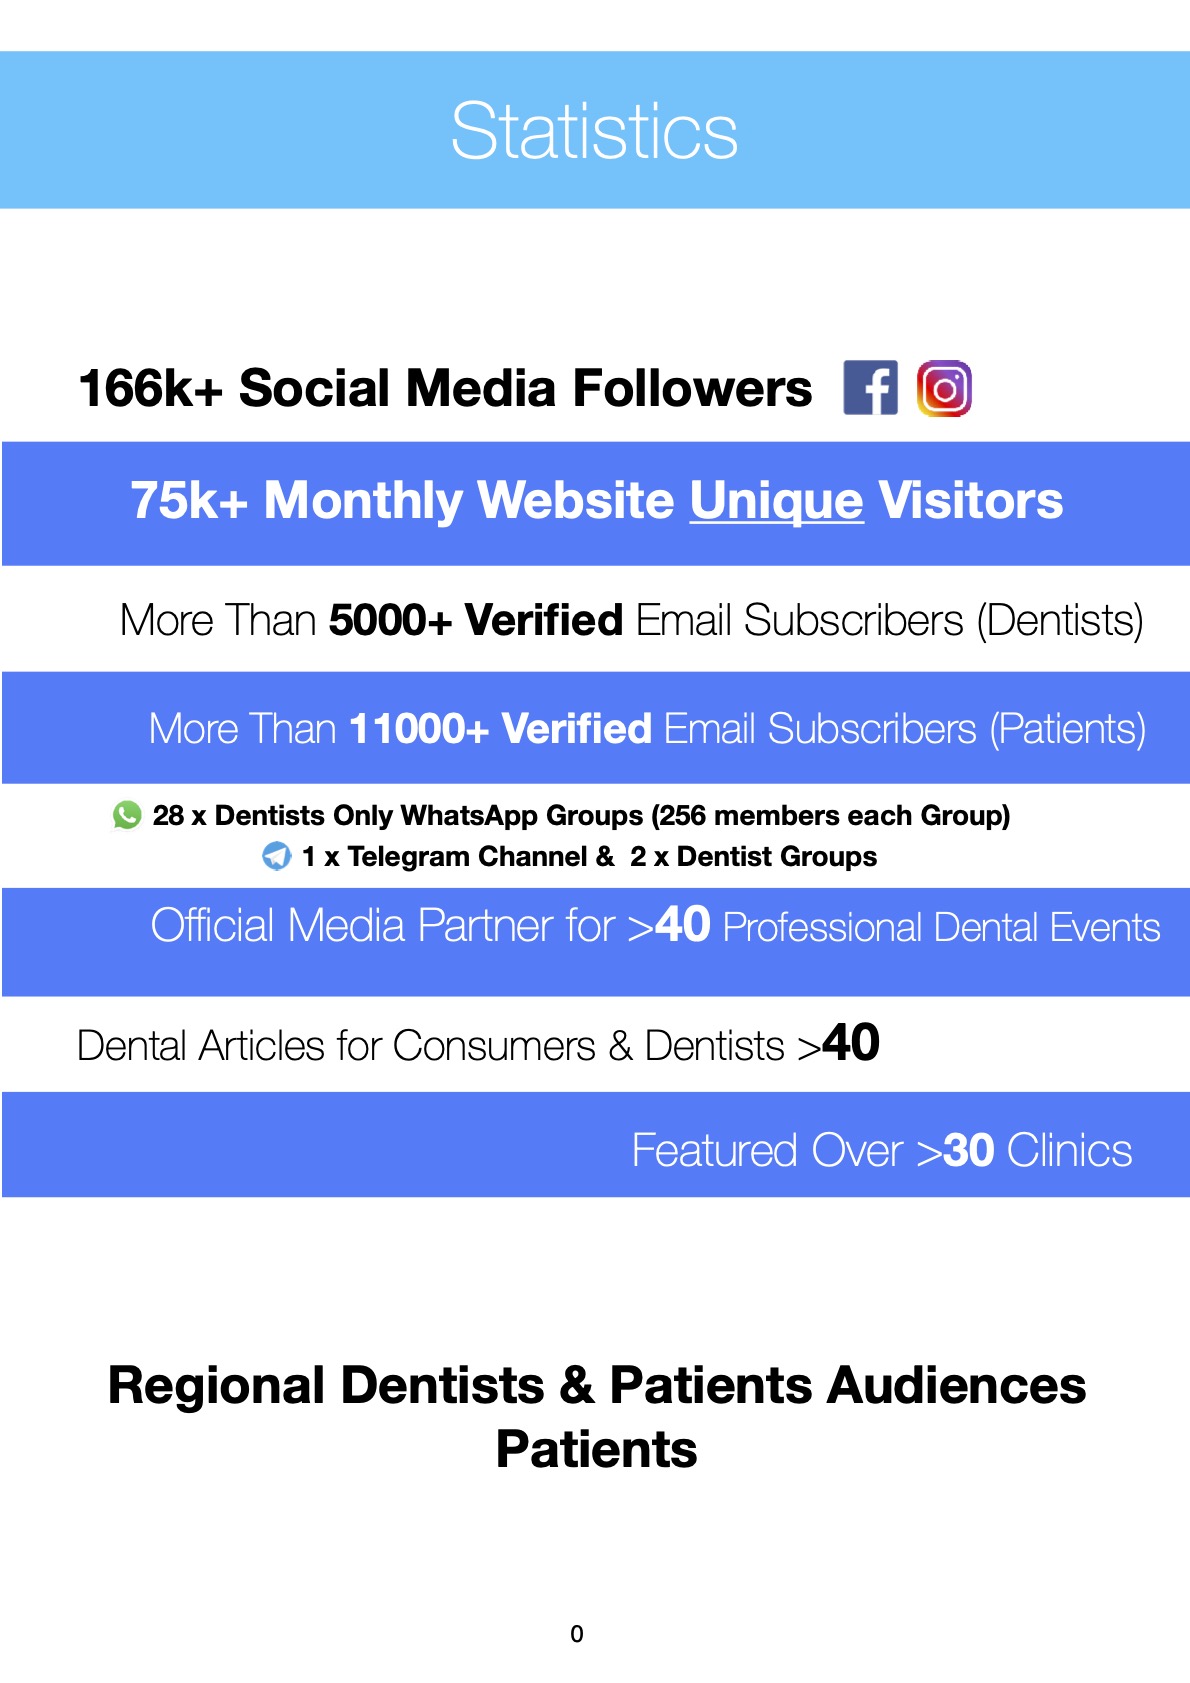 Dentistsnearby Company Profile 1-3-2021